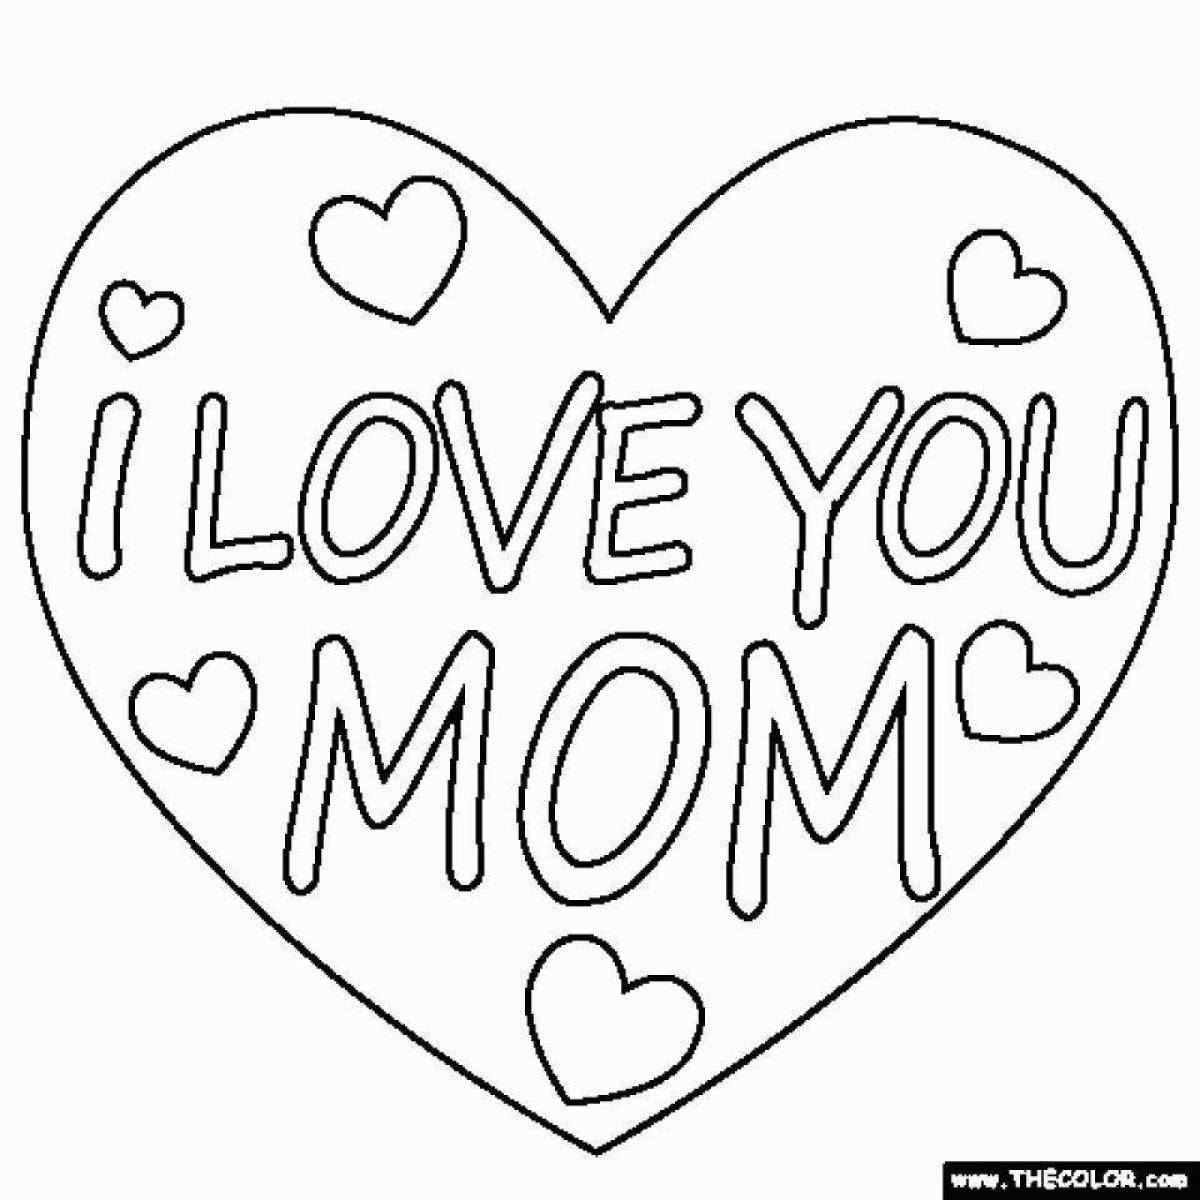 Coloring page shining mom